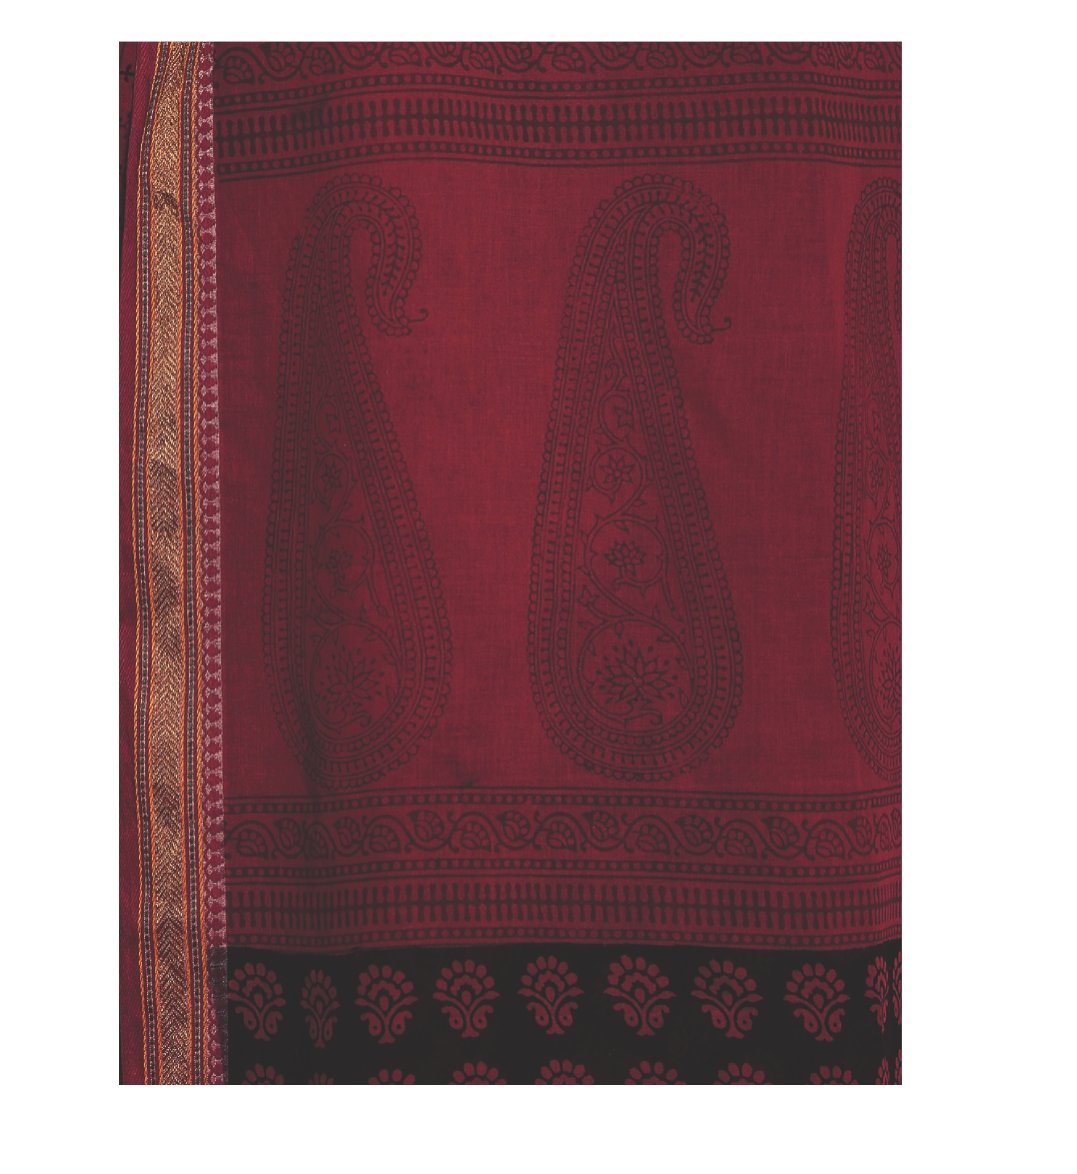 Maroon Cotton Hand Block Bagh Print Handcrafted Saree-Saree-Kalakari India-ZIBASA0051-Bagh, Cotton, Geographical Indication, Hand Blocks, Hand Crafted, Heritage Prints, Natural Dyes, Sarees, Sustainable Fabrics-[Linen,Ethnic,wear,Fashionista,Handloom,Handicraft,Indigo,blockprint,block,print,Cotton,Chanderi,Blue, latest,classy,party,bollywood,trendy,summer,style,traditional,formal,elegant,unique,style,hand,block,print, dabu,booti,gift,present,glamorous,affordable,collectible,Sari,Saree,printed, h